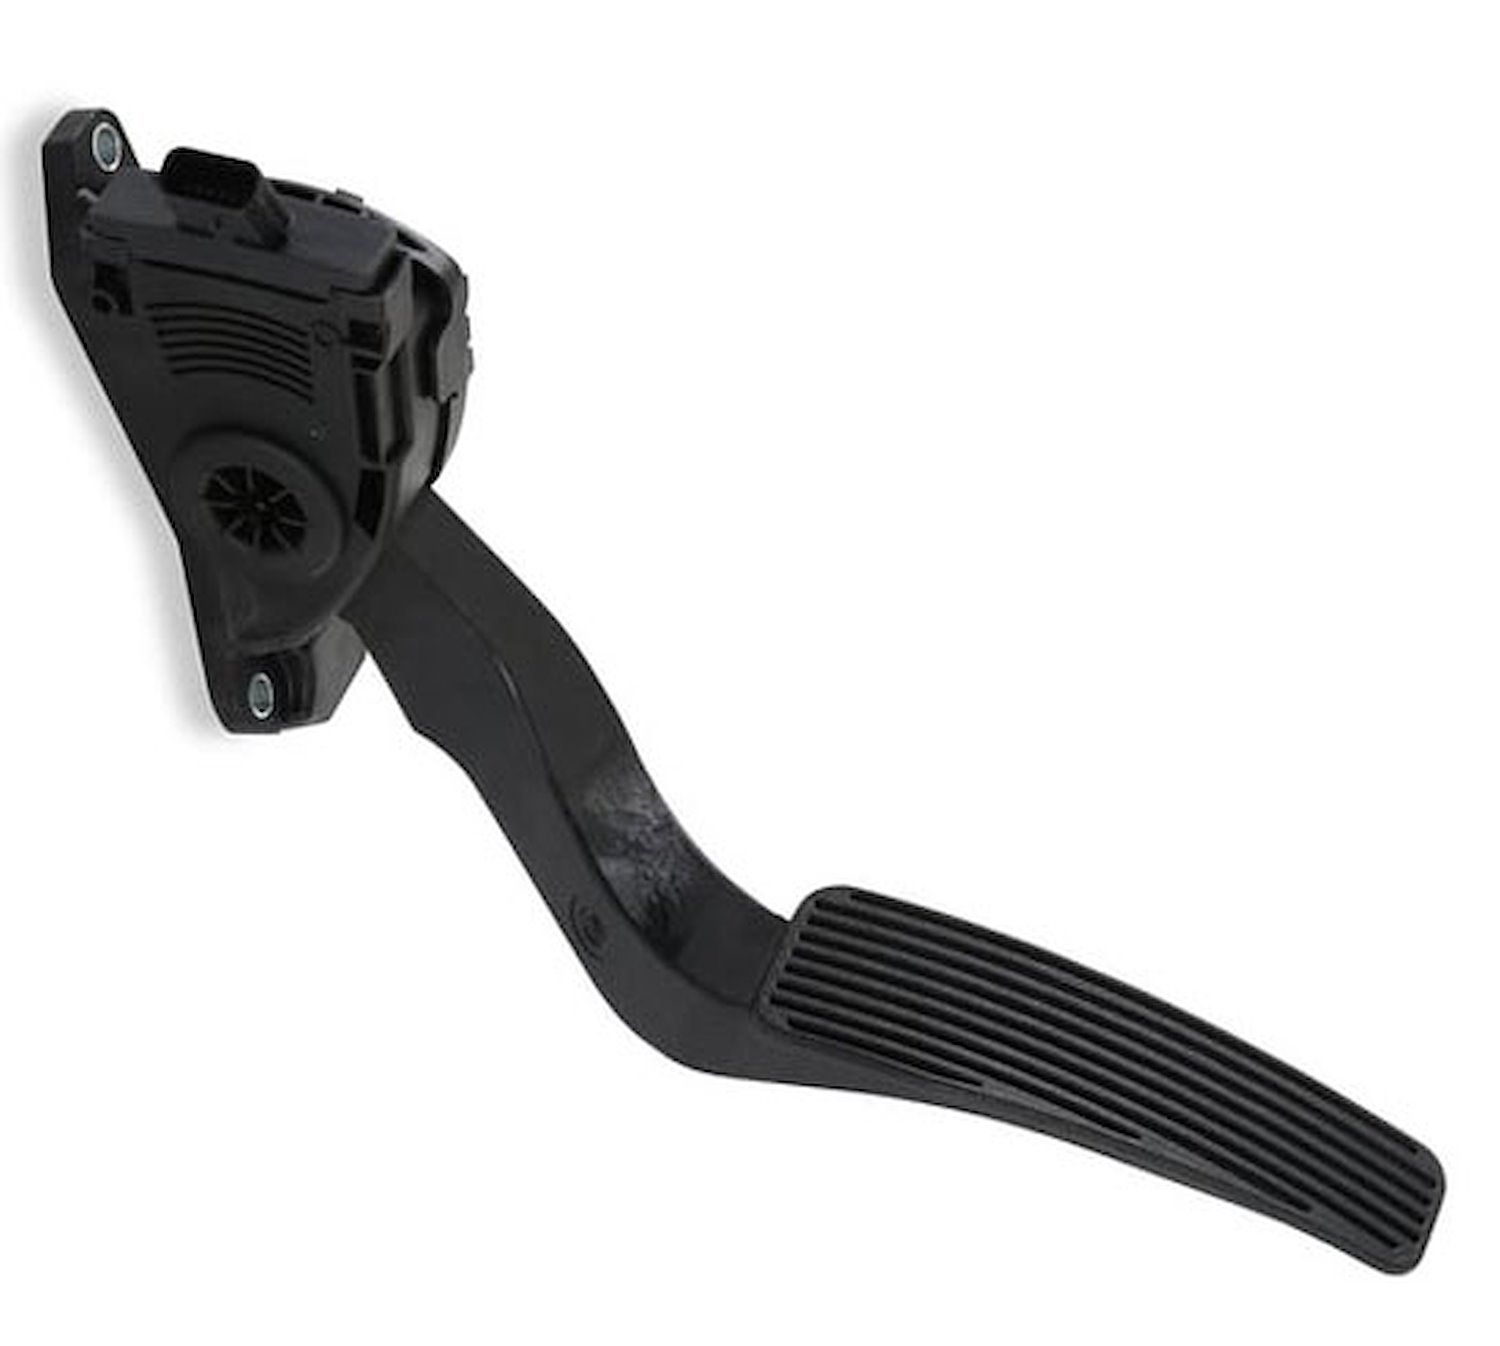 Drive-By-Wire Accelerator Pedal Assembly for Mopar Gen III